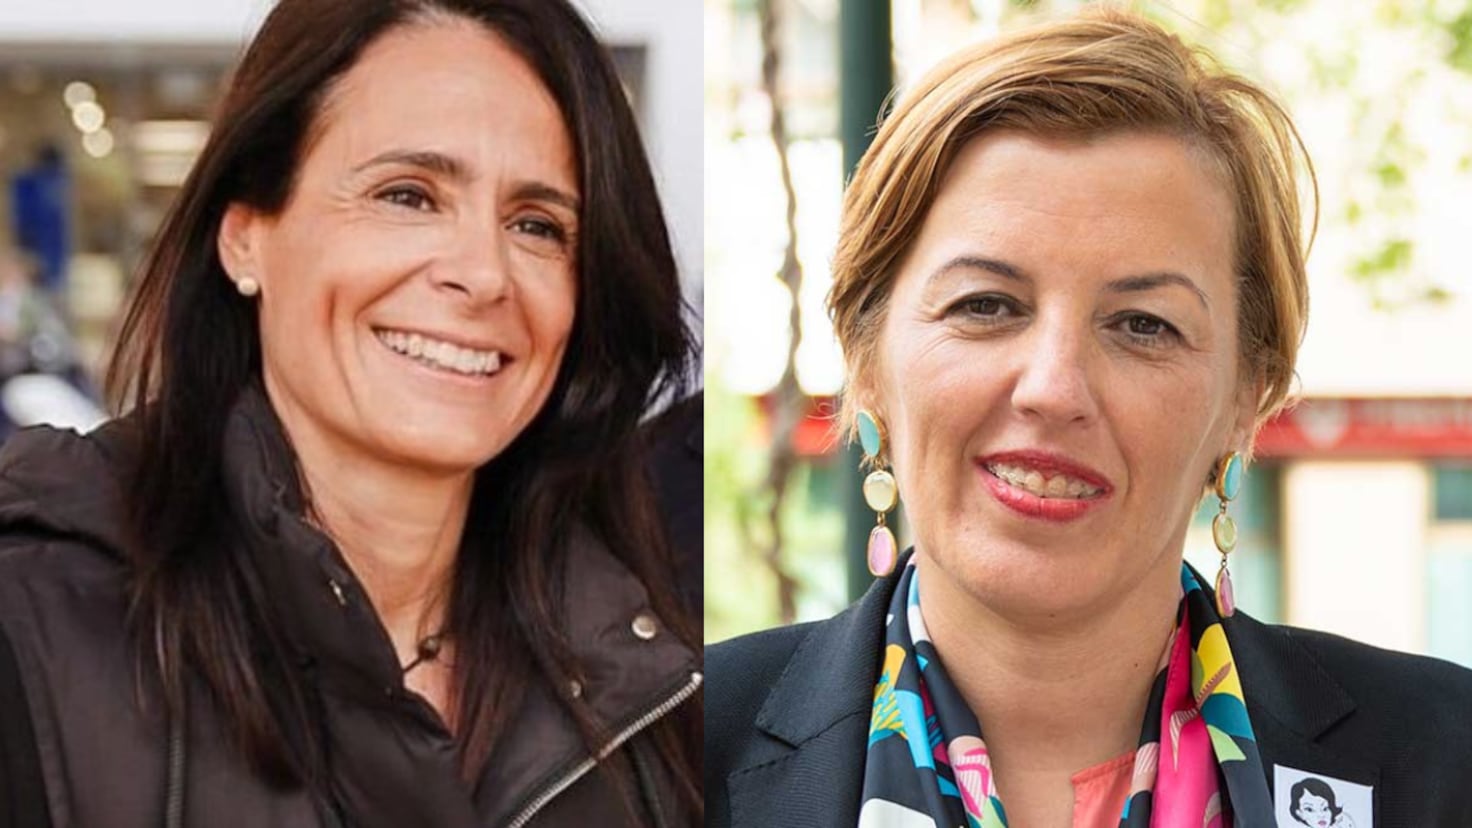 Mara del Mar Garca-Lorca, from the PP, and Sonia Ferrer, from the PSOE, fall in love and get married
